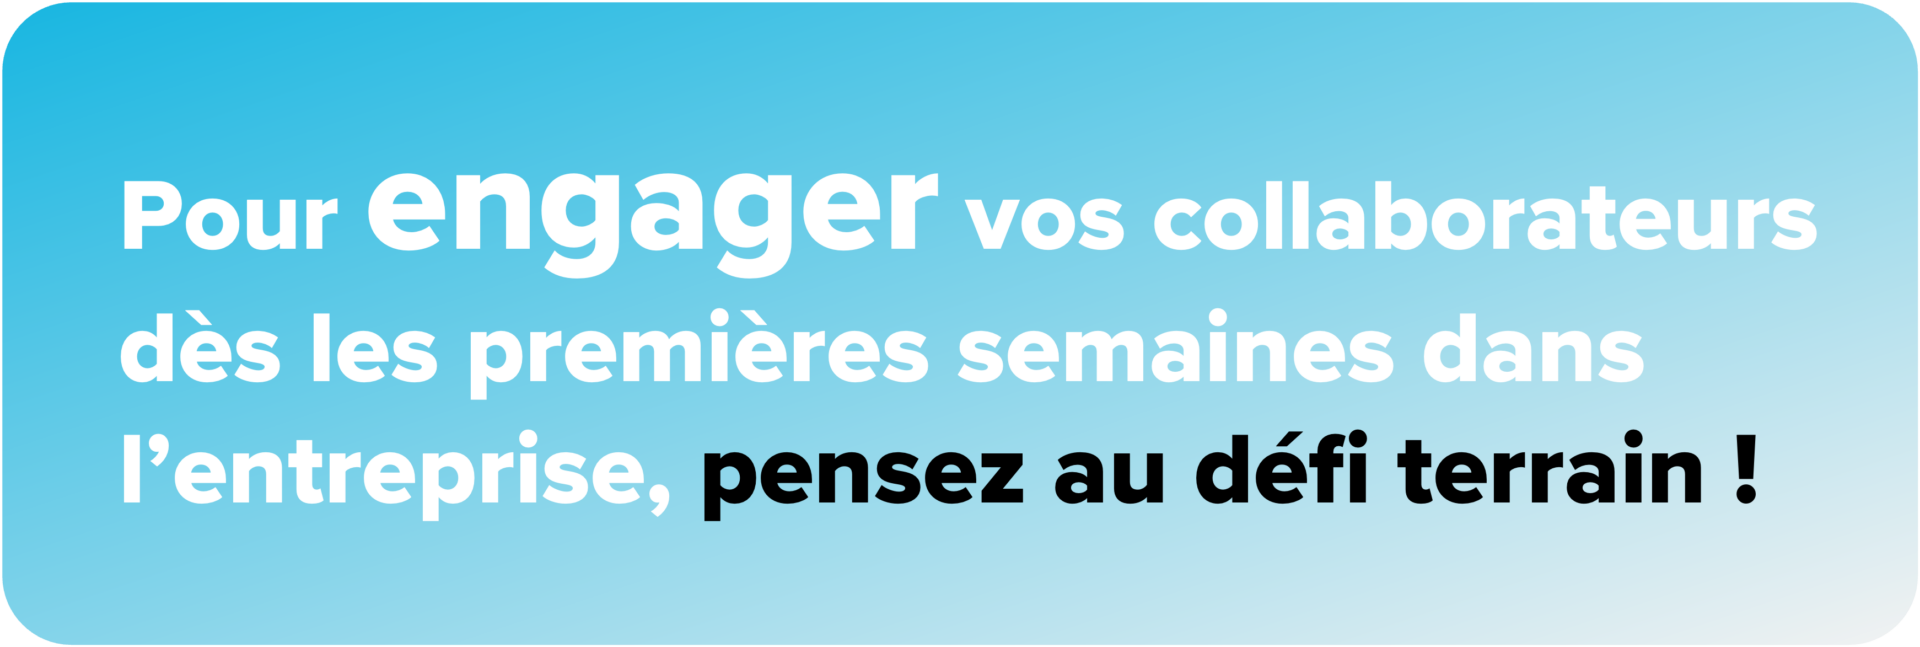 engager vos collaborateurs